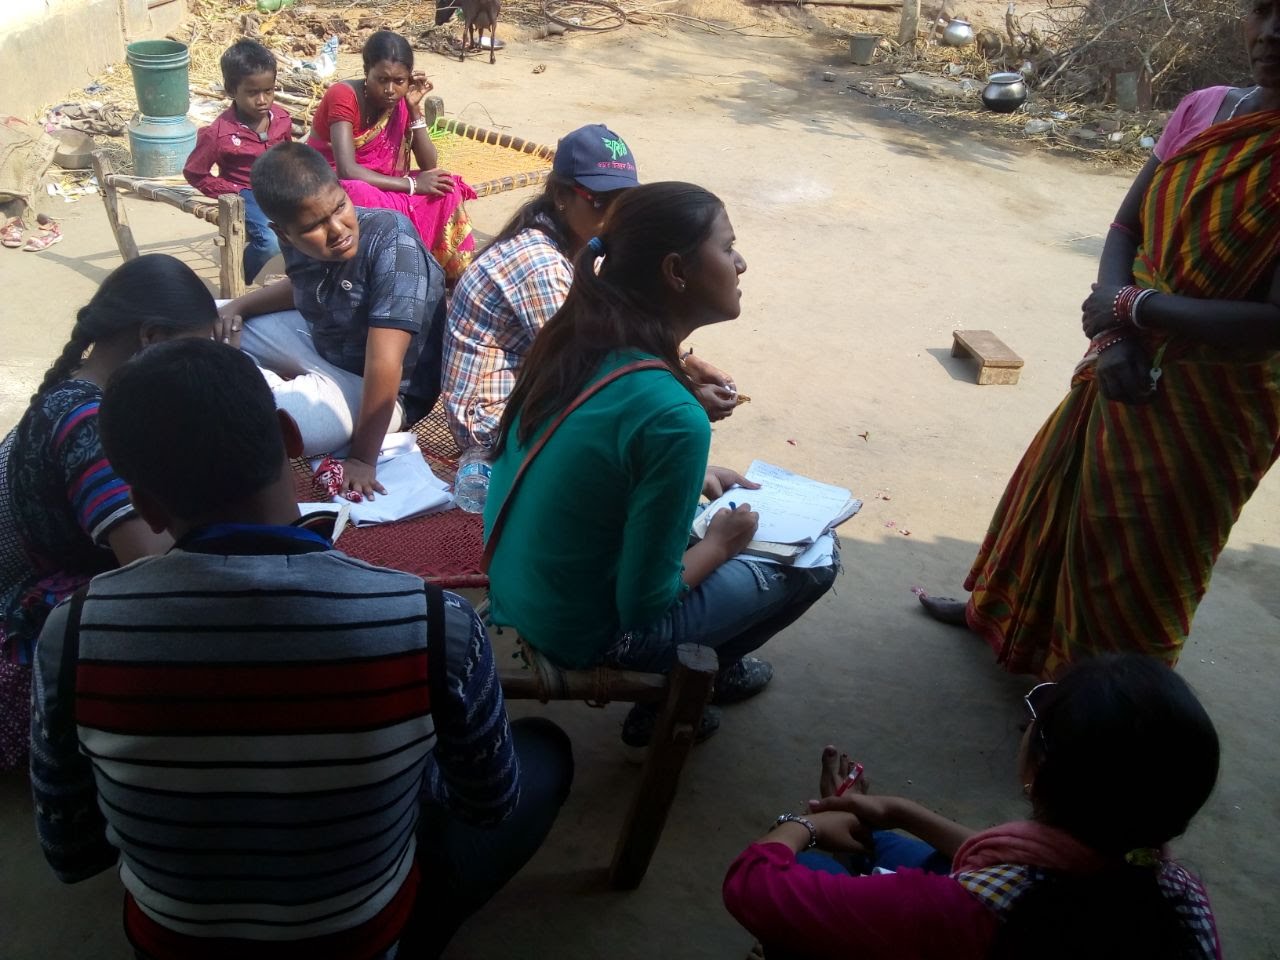 STUDENTS ARE INTERACTING WITH THE VILLAGERS OF PURULIA 2018